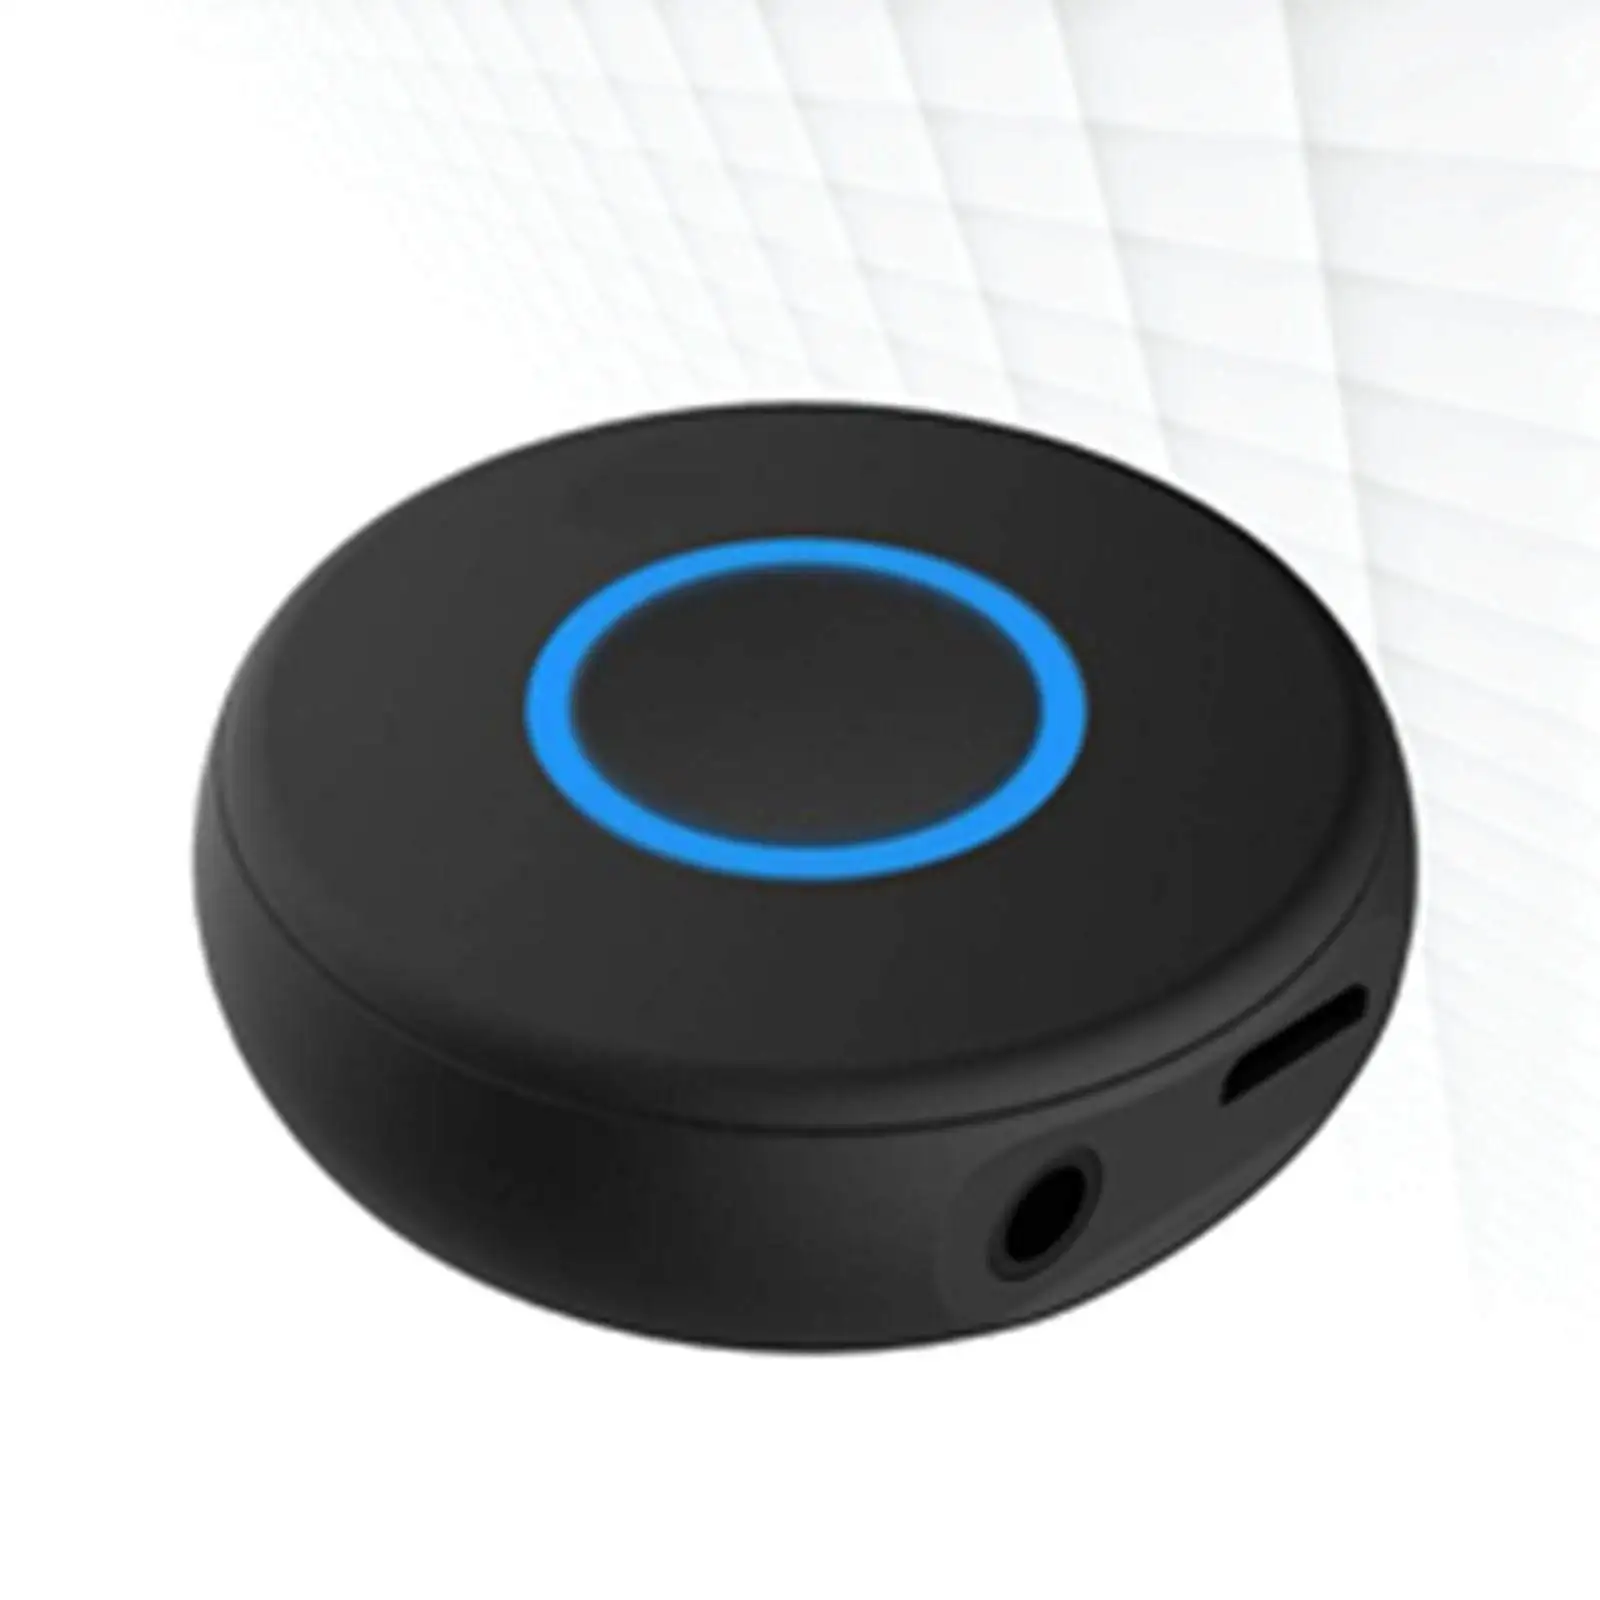 Bluetooth Adapter Transmitter with AUX 3.5mm for Home Car Music Sound System for TV Headphones Speaker PC